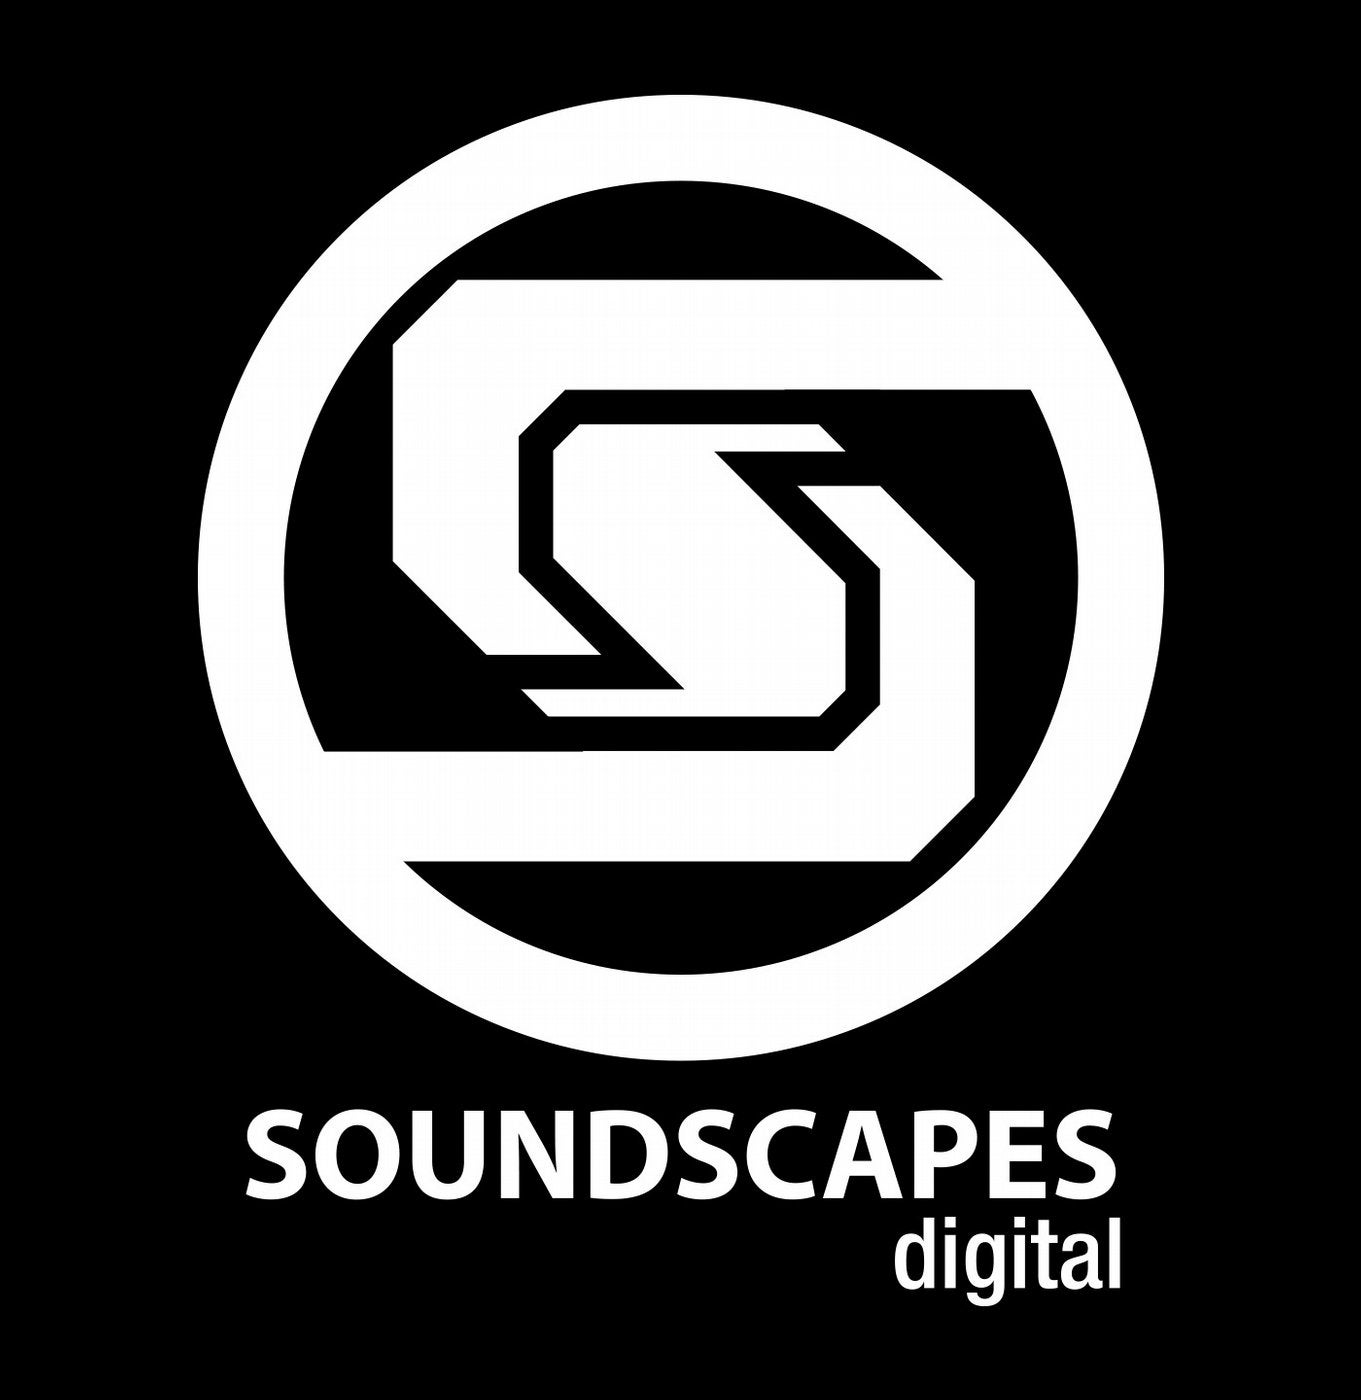 5 Years of Soundscapes